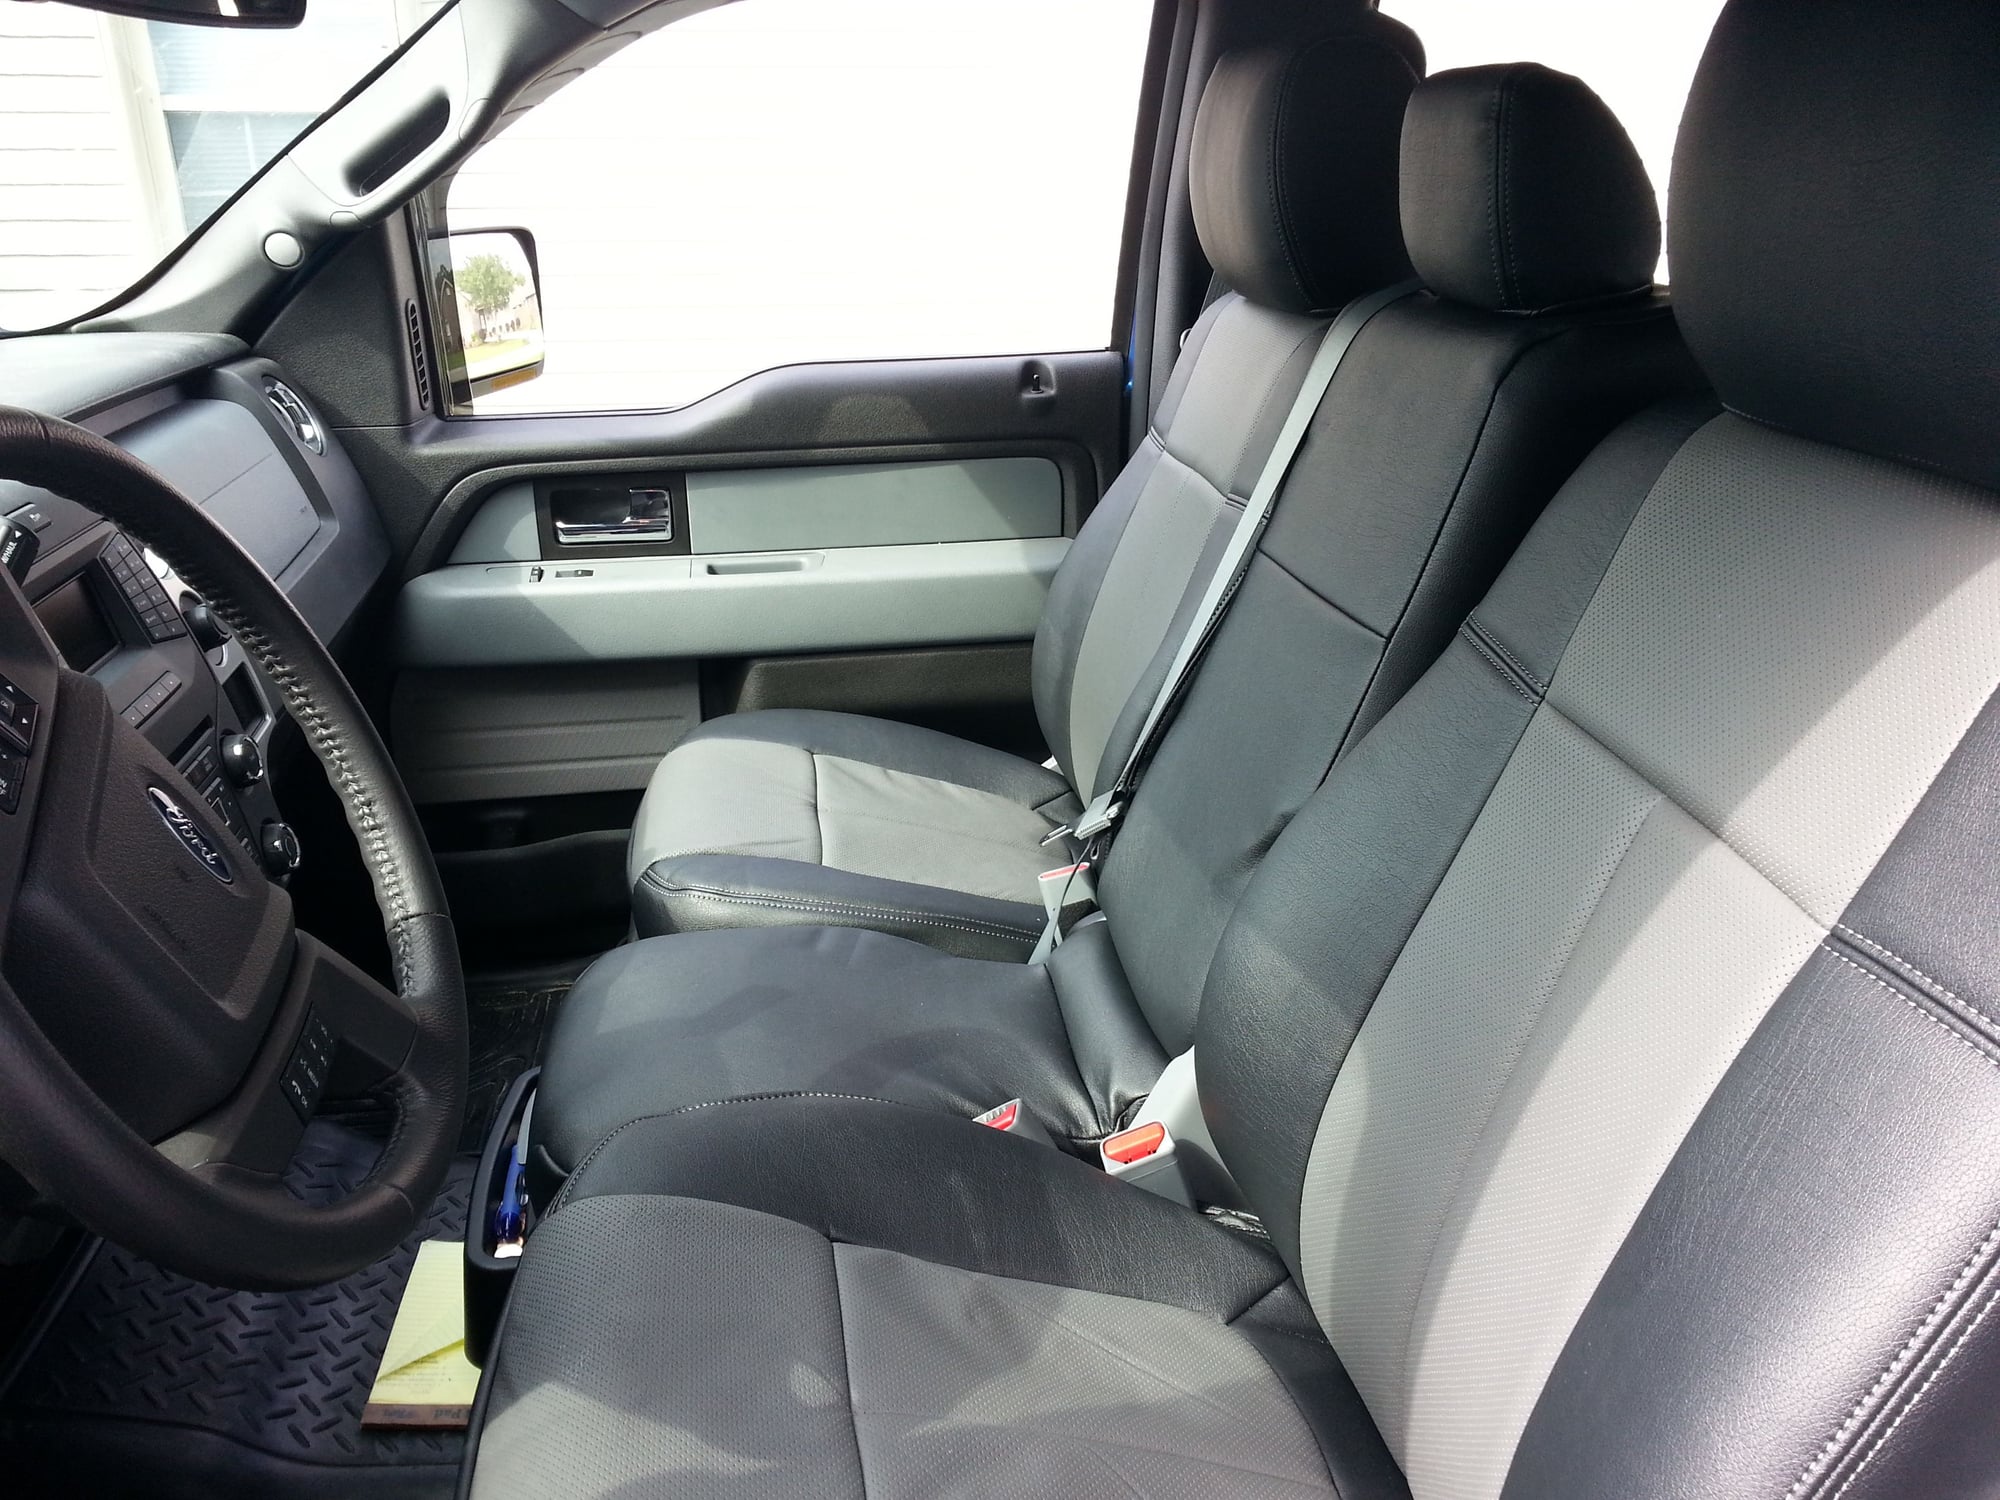 Best Seat Covers - Form/Function and Price - Ford F150 Forum